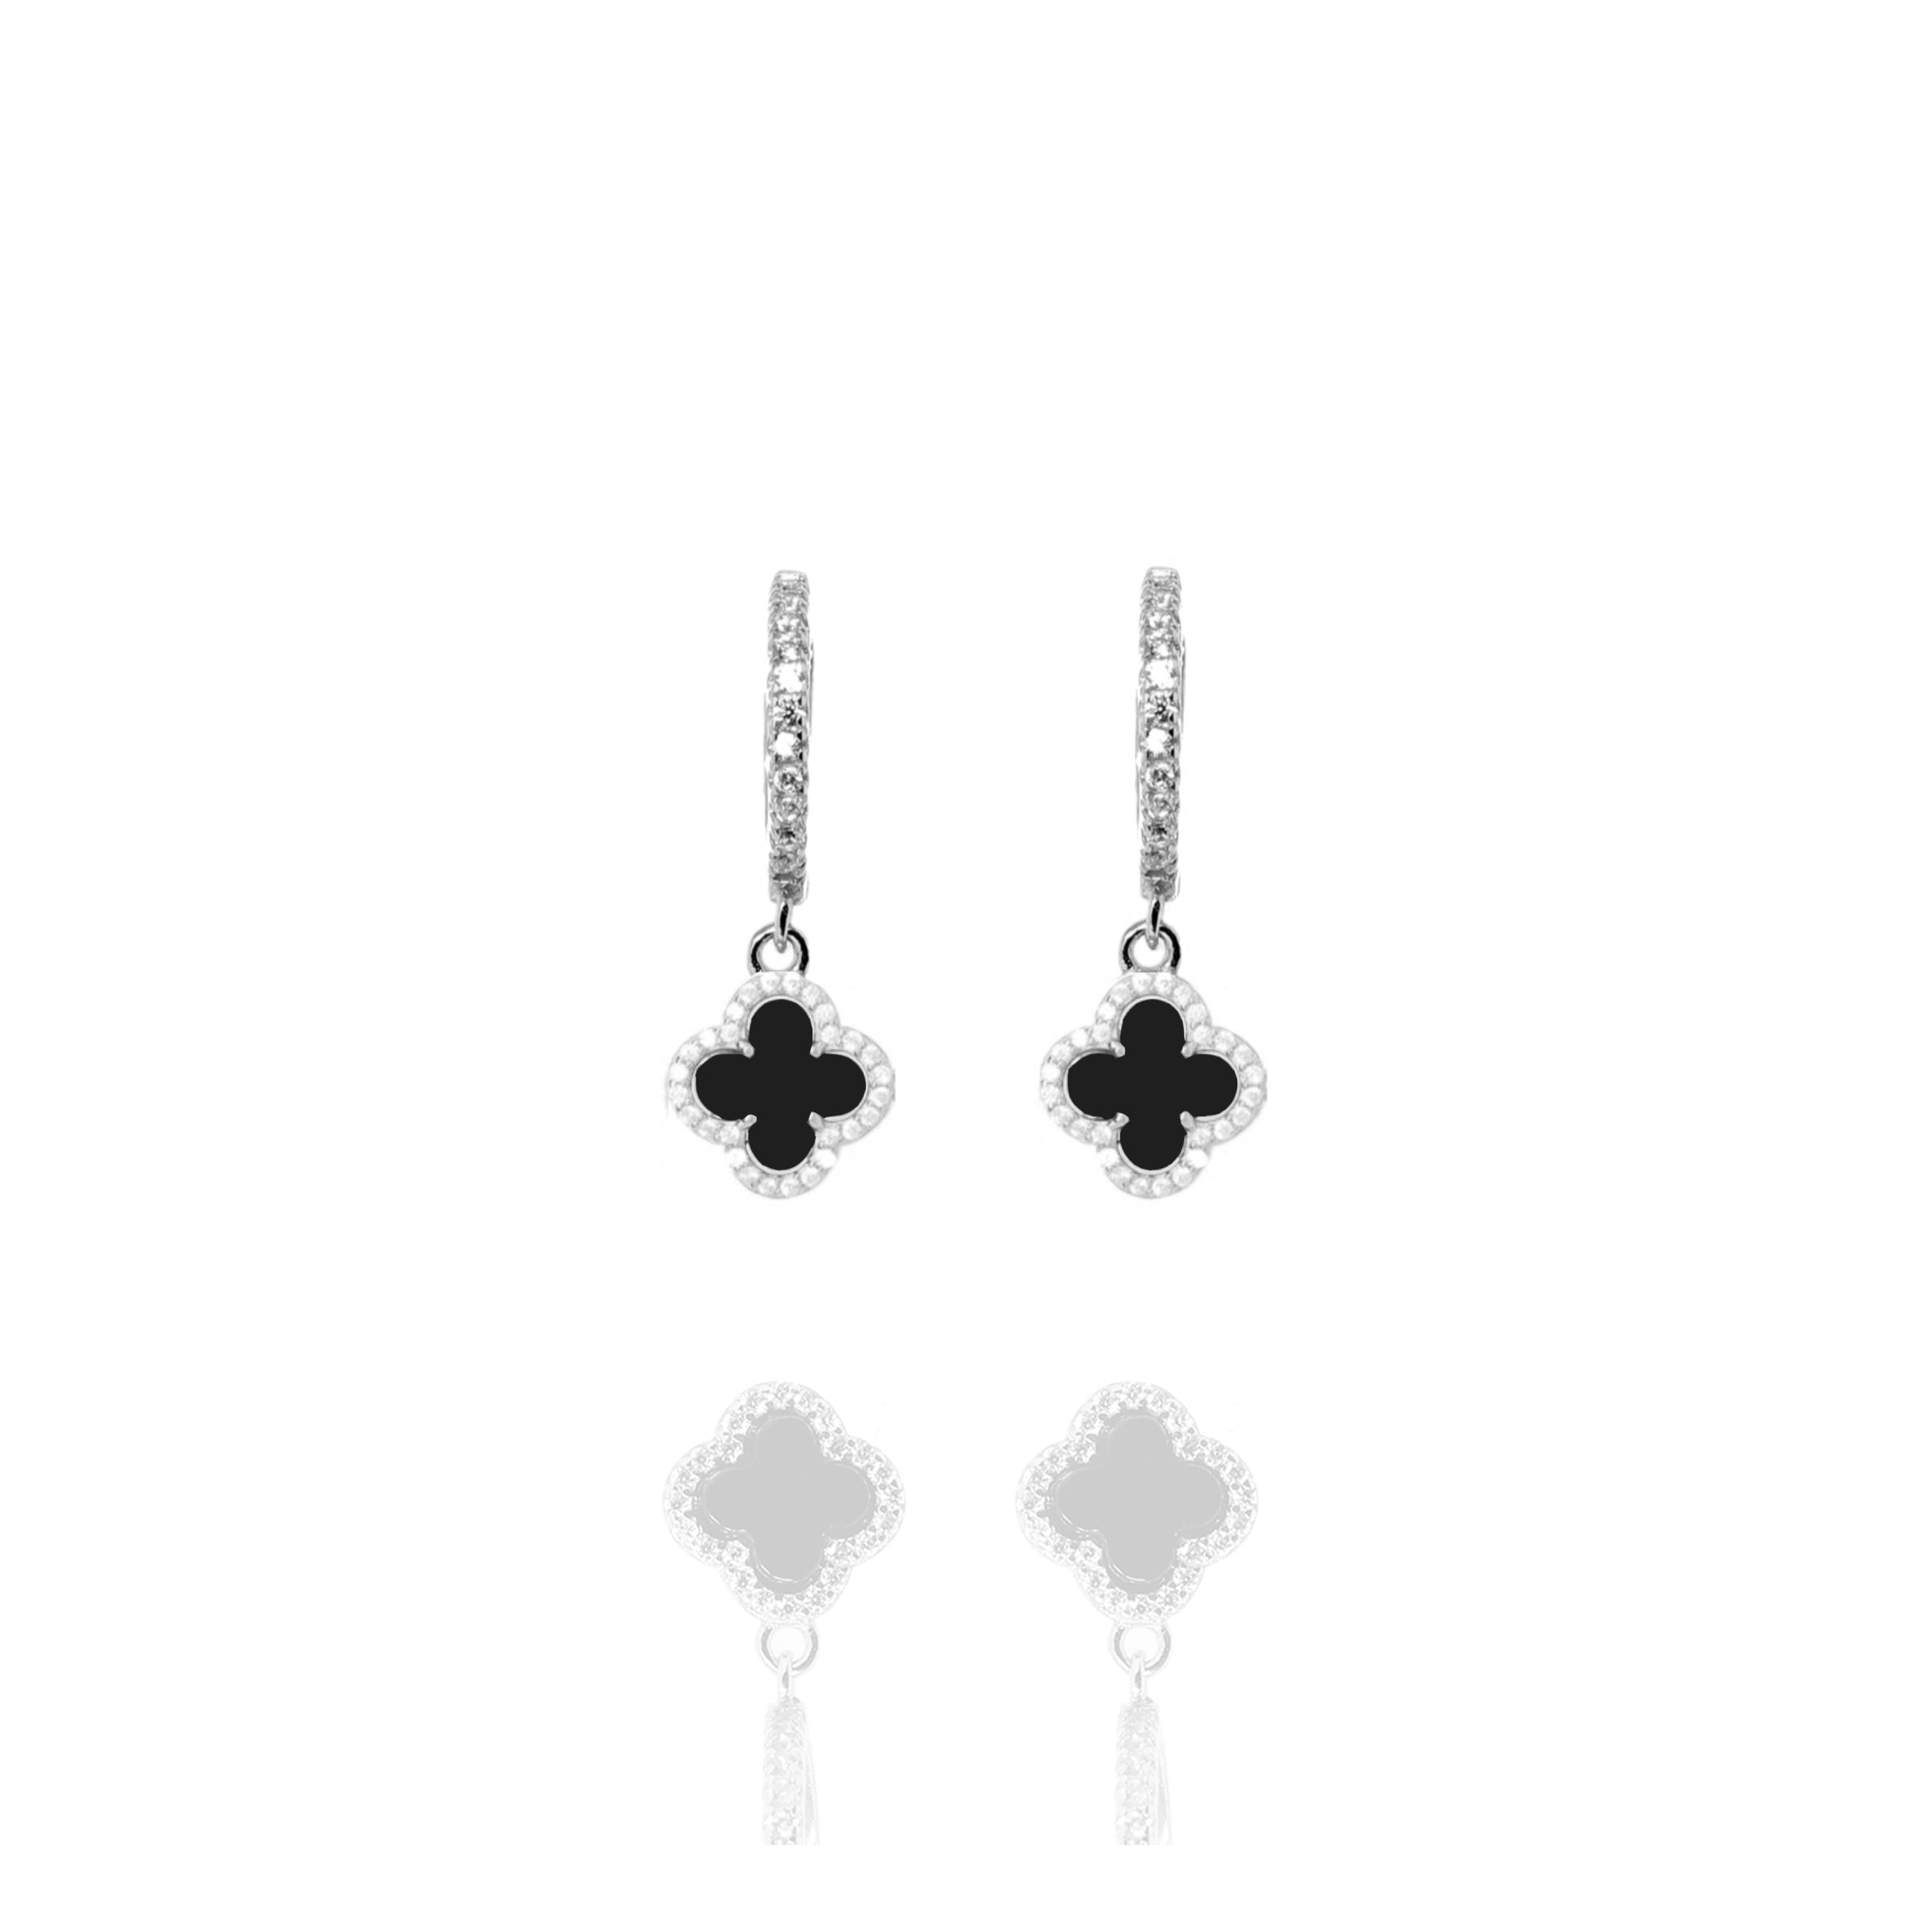 Clover Hoops with Black Onyx and Cubic Zirconia (Silver)